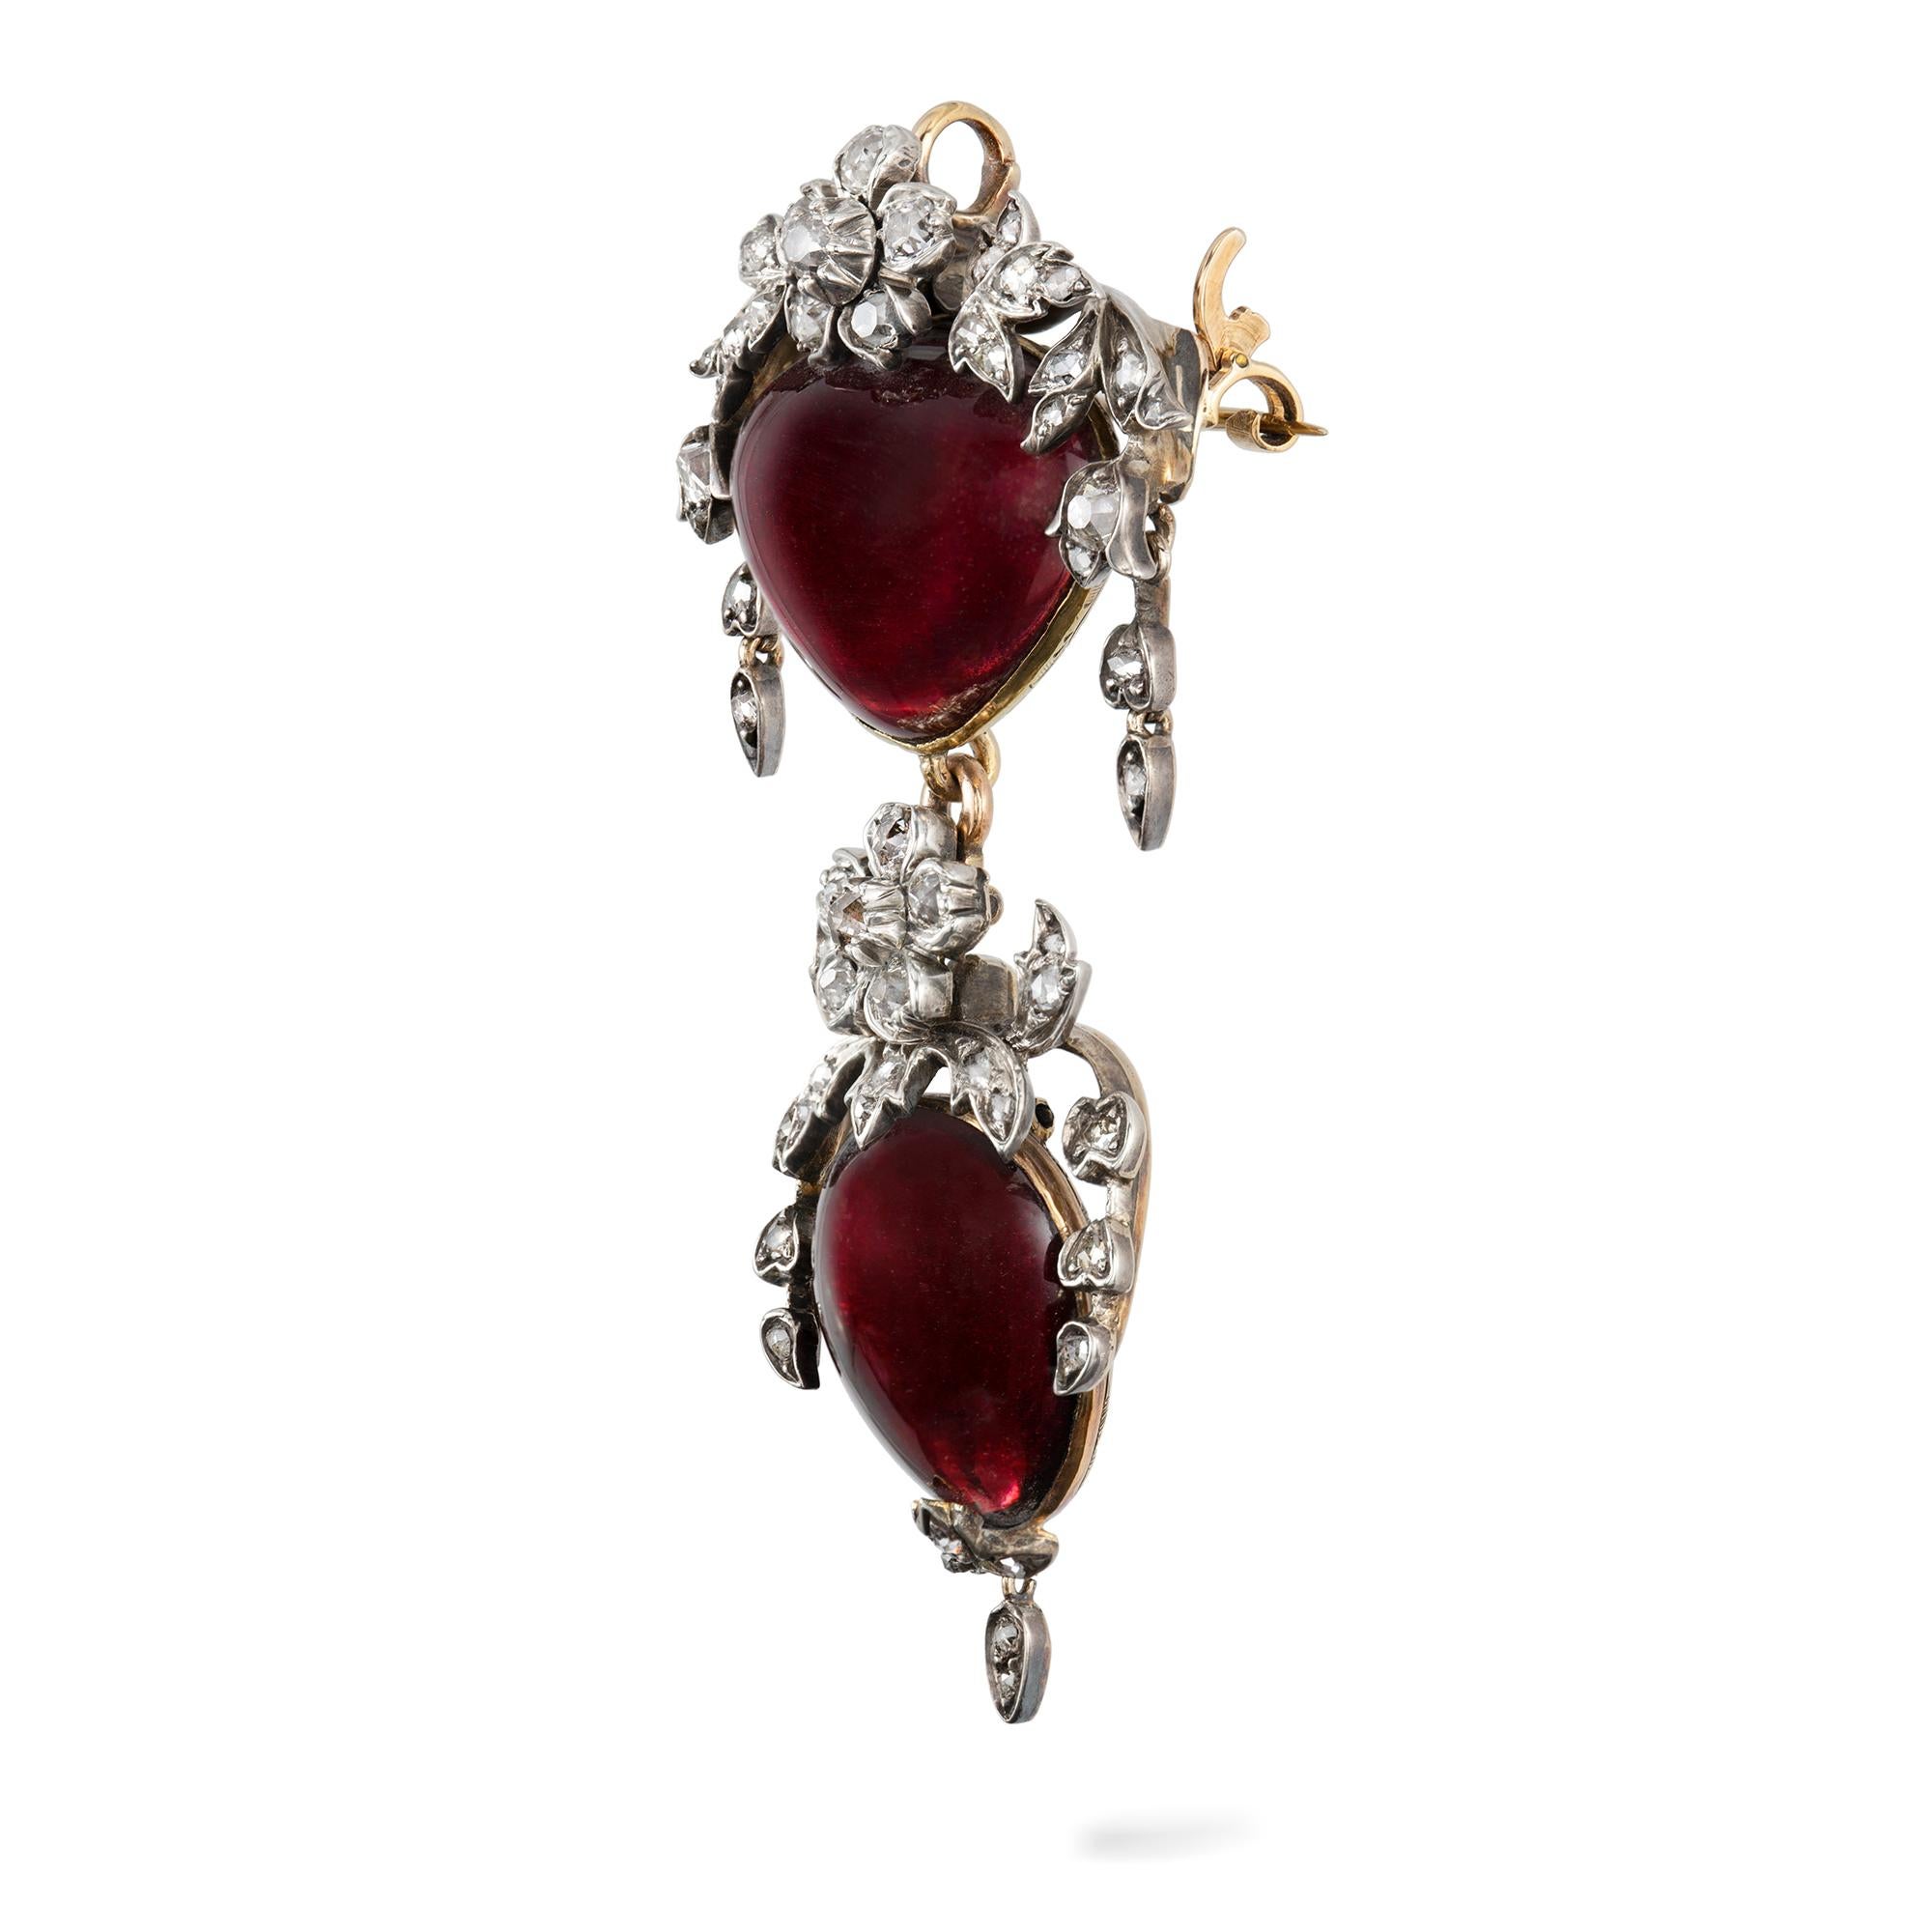 A Victorian garnet and diamond pendant/brooch, the heart shaped cabochon garnet surmounted by a floral and foliate spray, set throughout with rose-cut, old brilliant-cut and cushion cut-diamonds, to a delicately etched gold closed back setting with